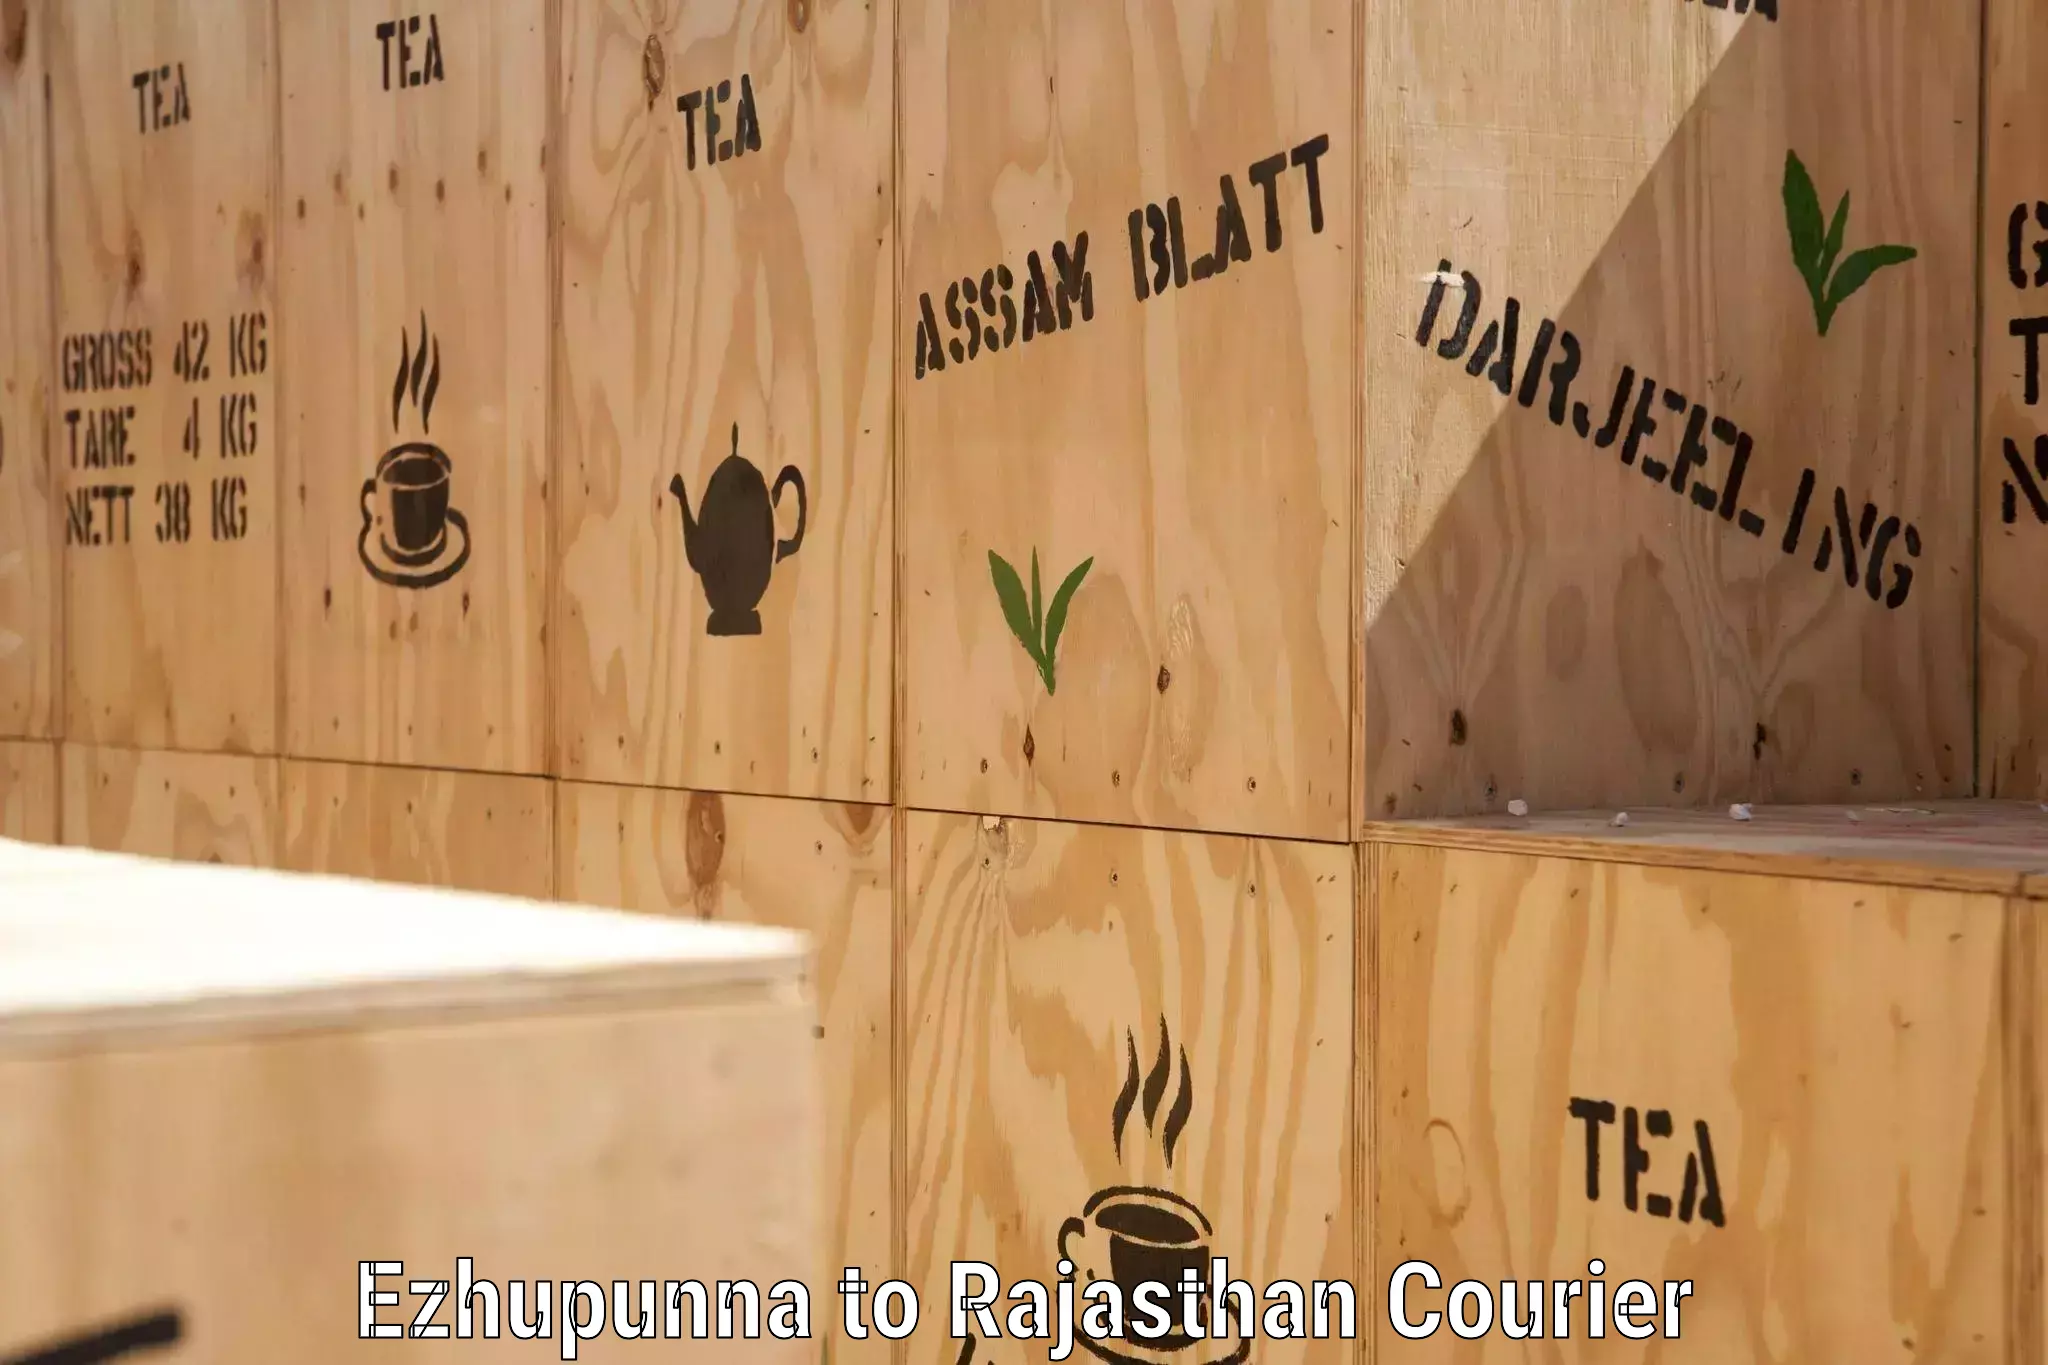 State-of-the-art courier technology Ezhupunna to Bagru